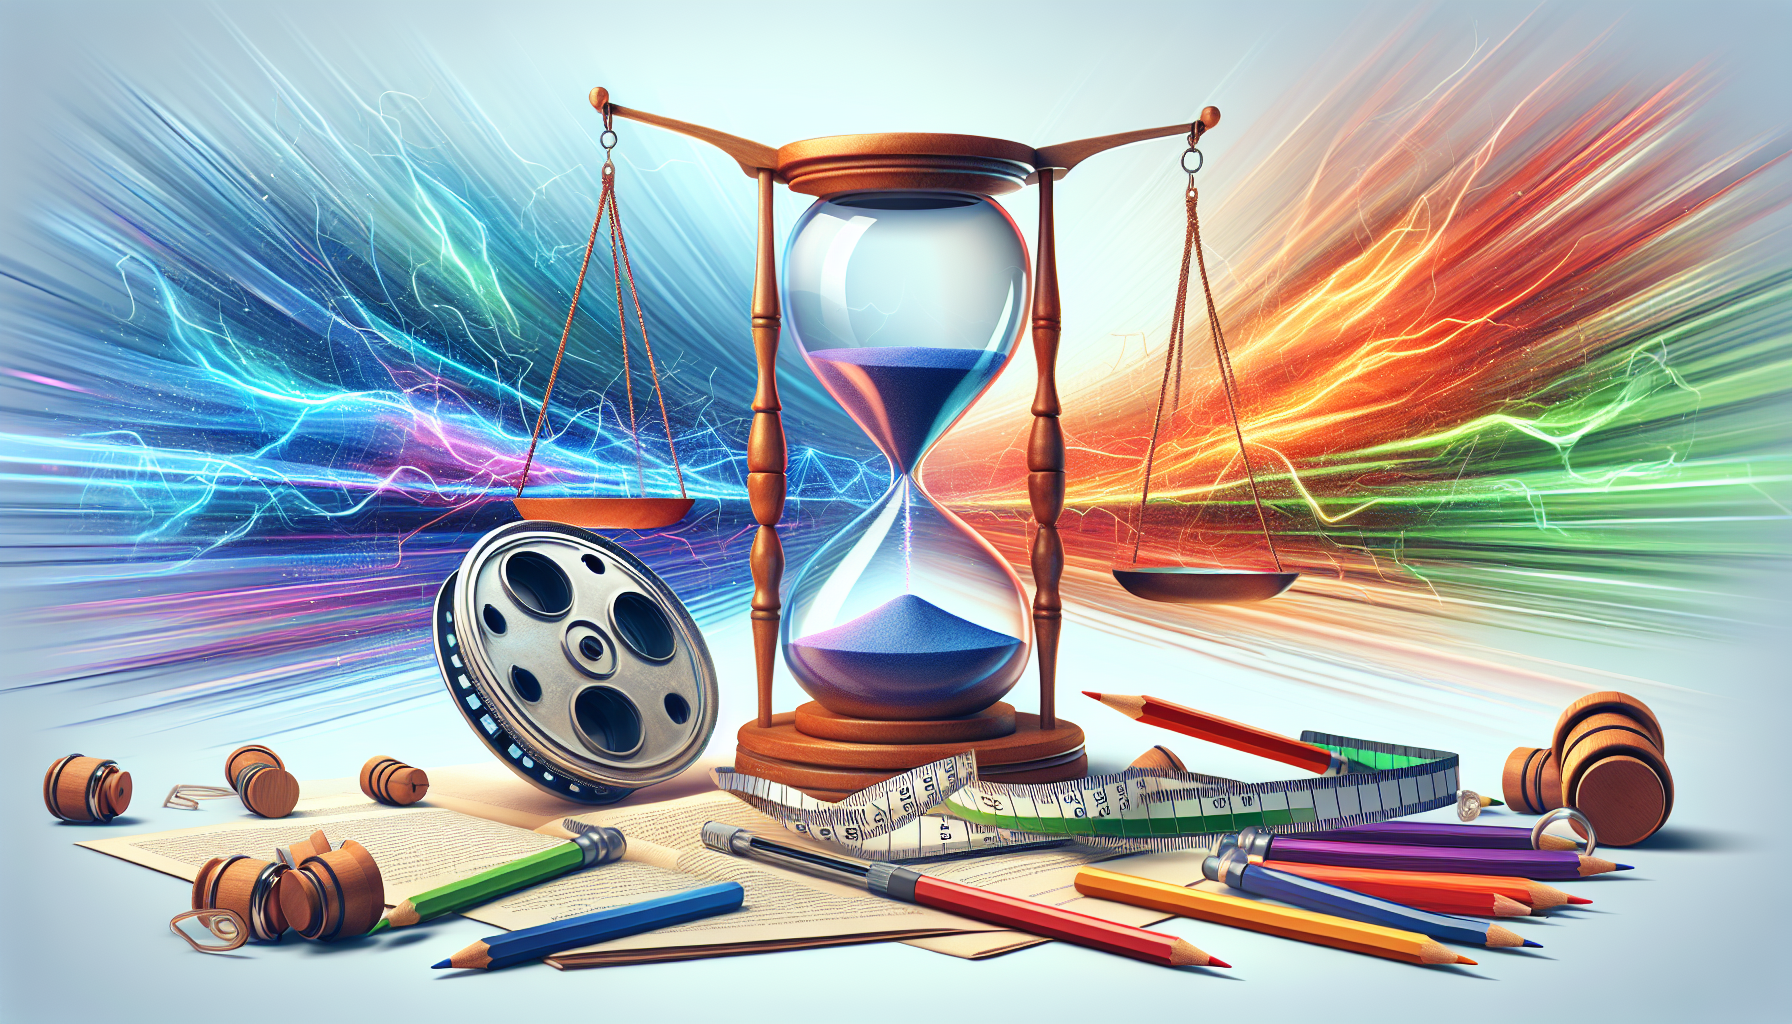 An illustrative representation of the concept of 'Mastering Tension: The Art of Pacing in Action Scripts'. Depict this in a photorealistic style with the use of a wide array of bright and modern colors. The scene might include elements like: an hourglass to symbolize time, a film reel to show scripts, a balance scale to demonstrate tension and pacing, and energetic, blurred lines in the background to imply movement or action. Please make sure that no words are present in the image.